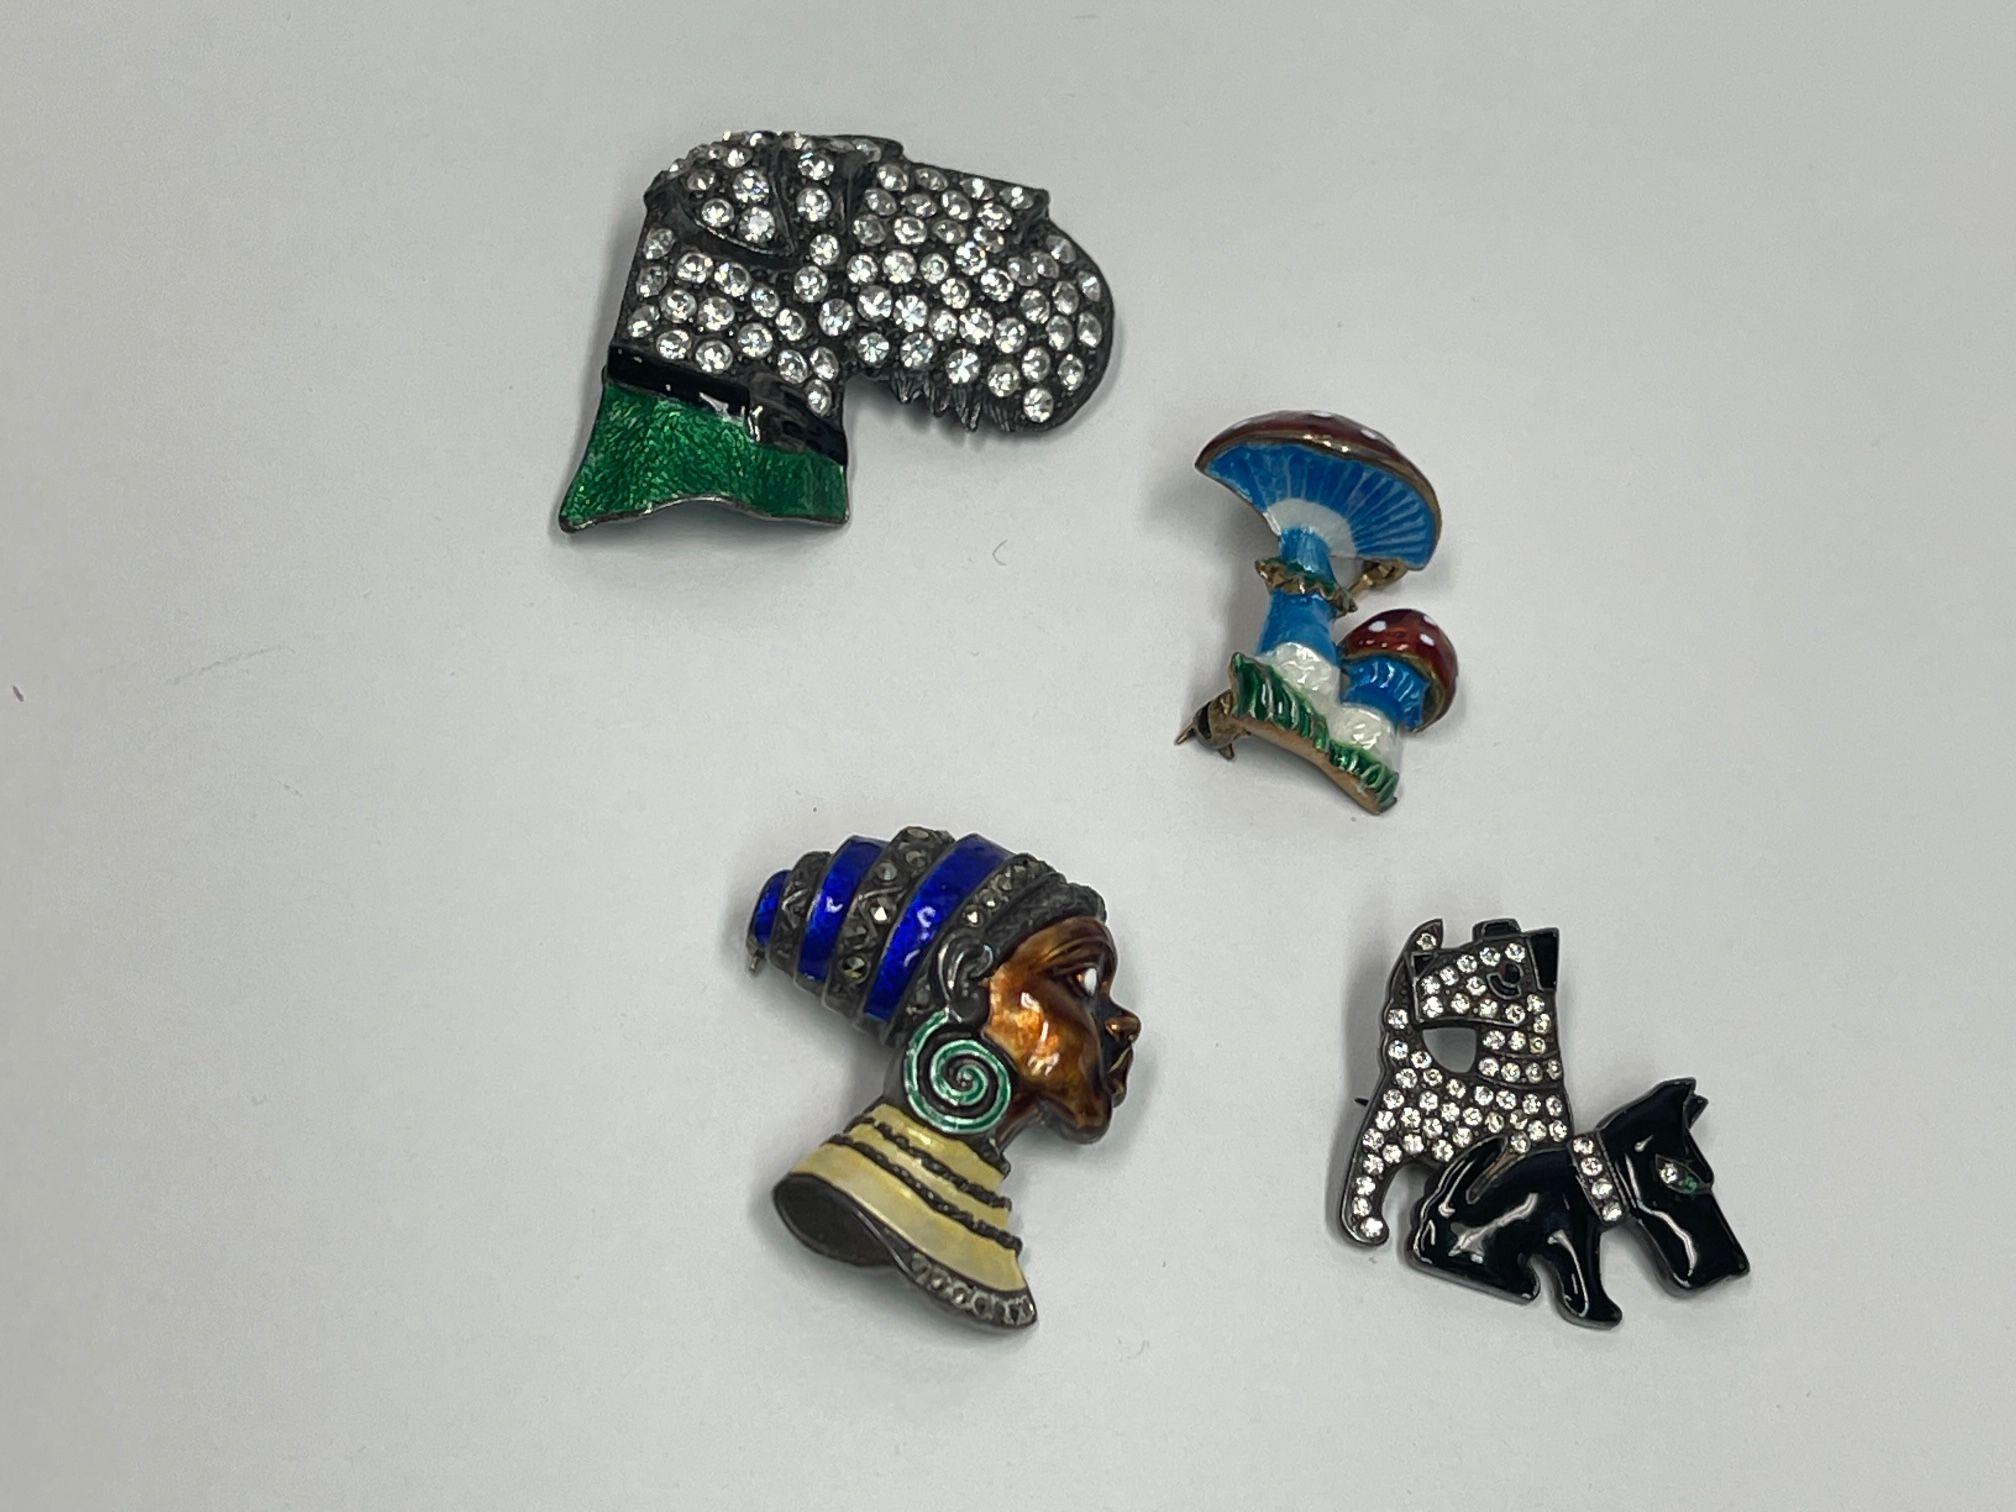 Awesome Vintage Collection of 4 Enamel Sterling Silver Brooches, featuring a Terrier Dog encrusted with sparkling CZ Faux Diamante, a pair of Scottie Dogs enhanced with sparkling CZ Faux Diamante, an African Princess and a of pair colorful Enamel